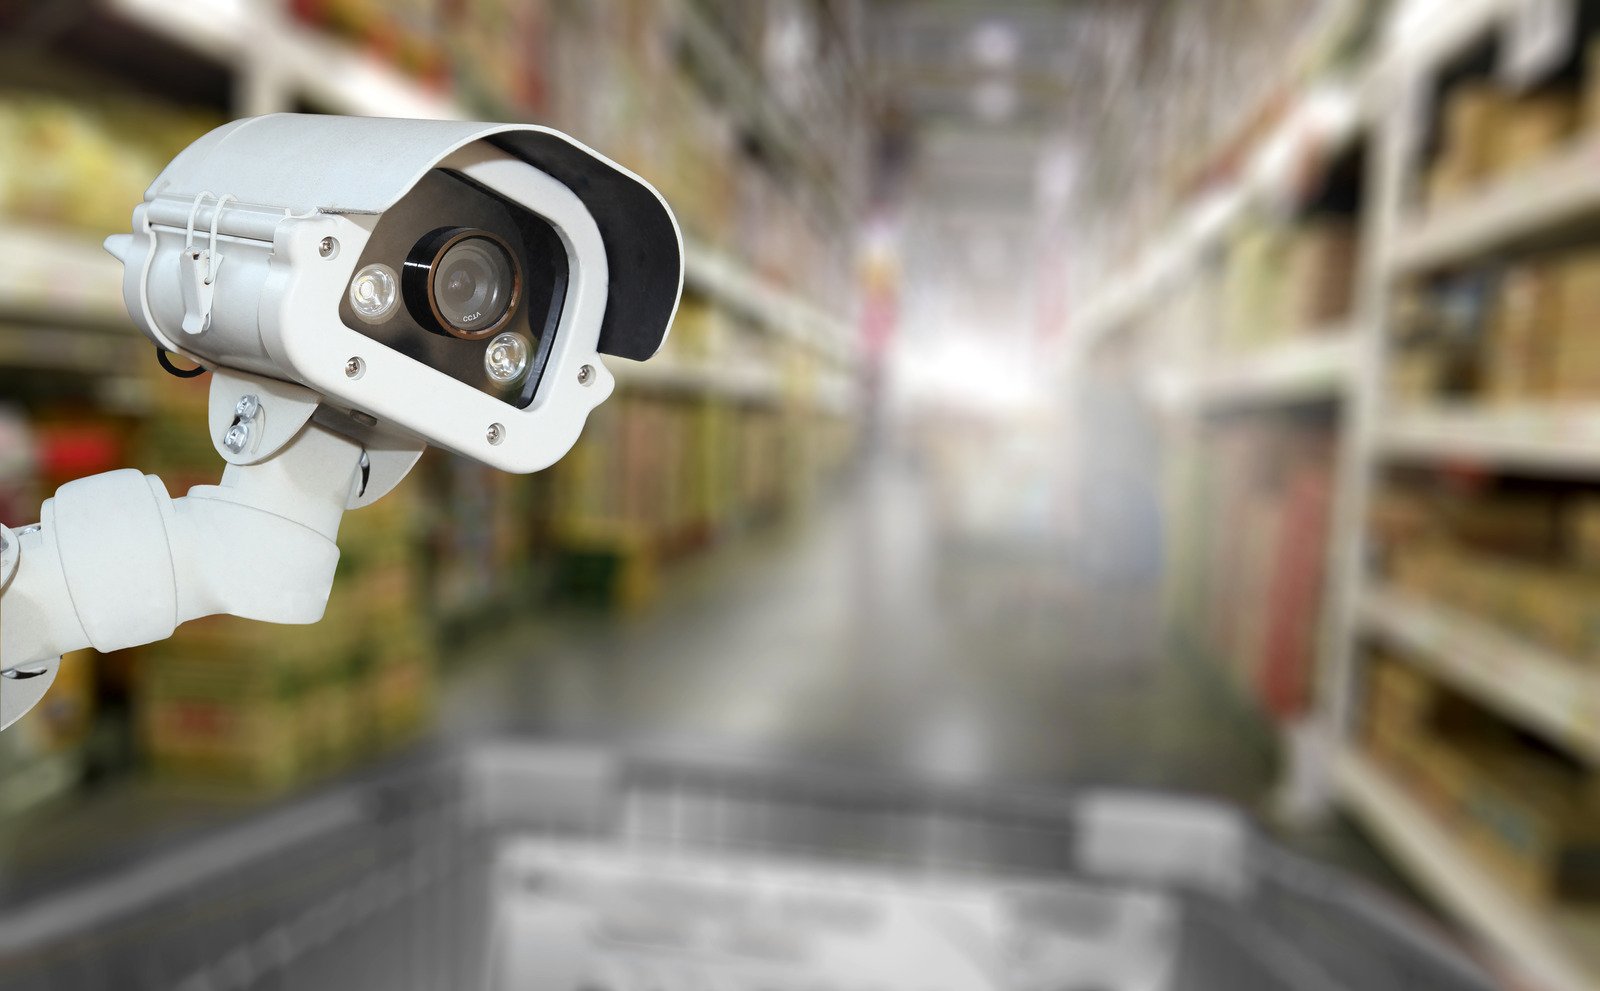 CCTV systems Widnes security in shopping mall supermarket